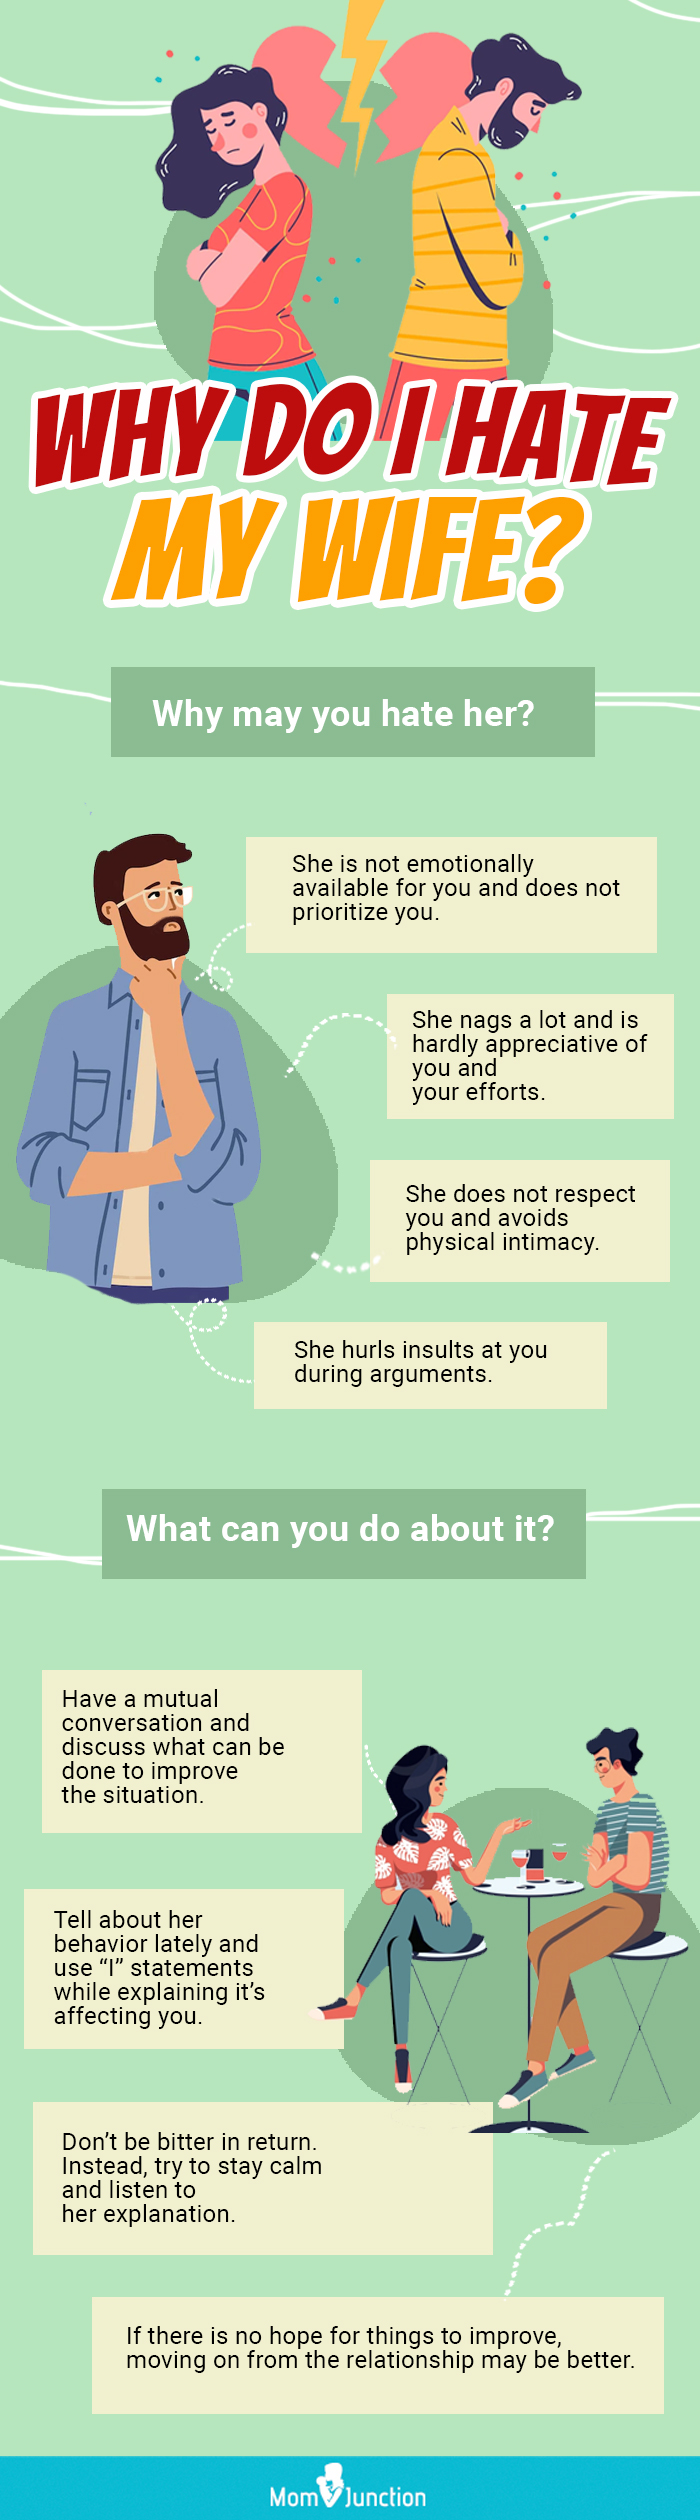 why do i hate my wife? [infographic]